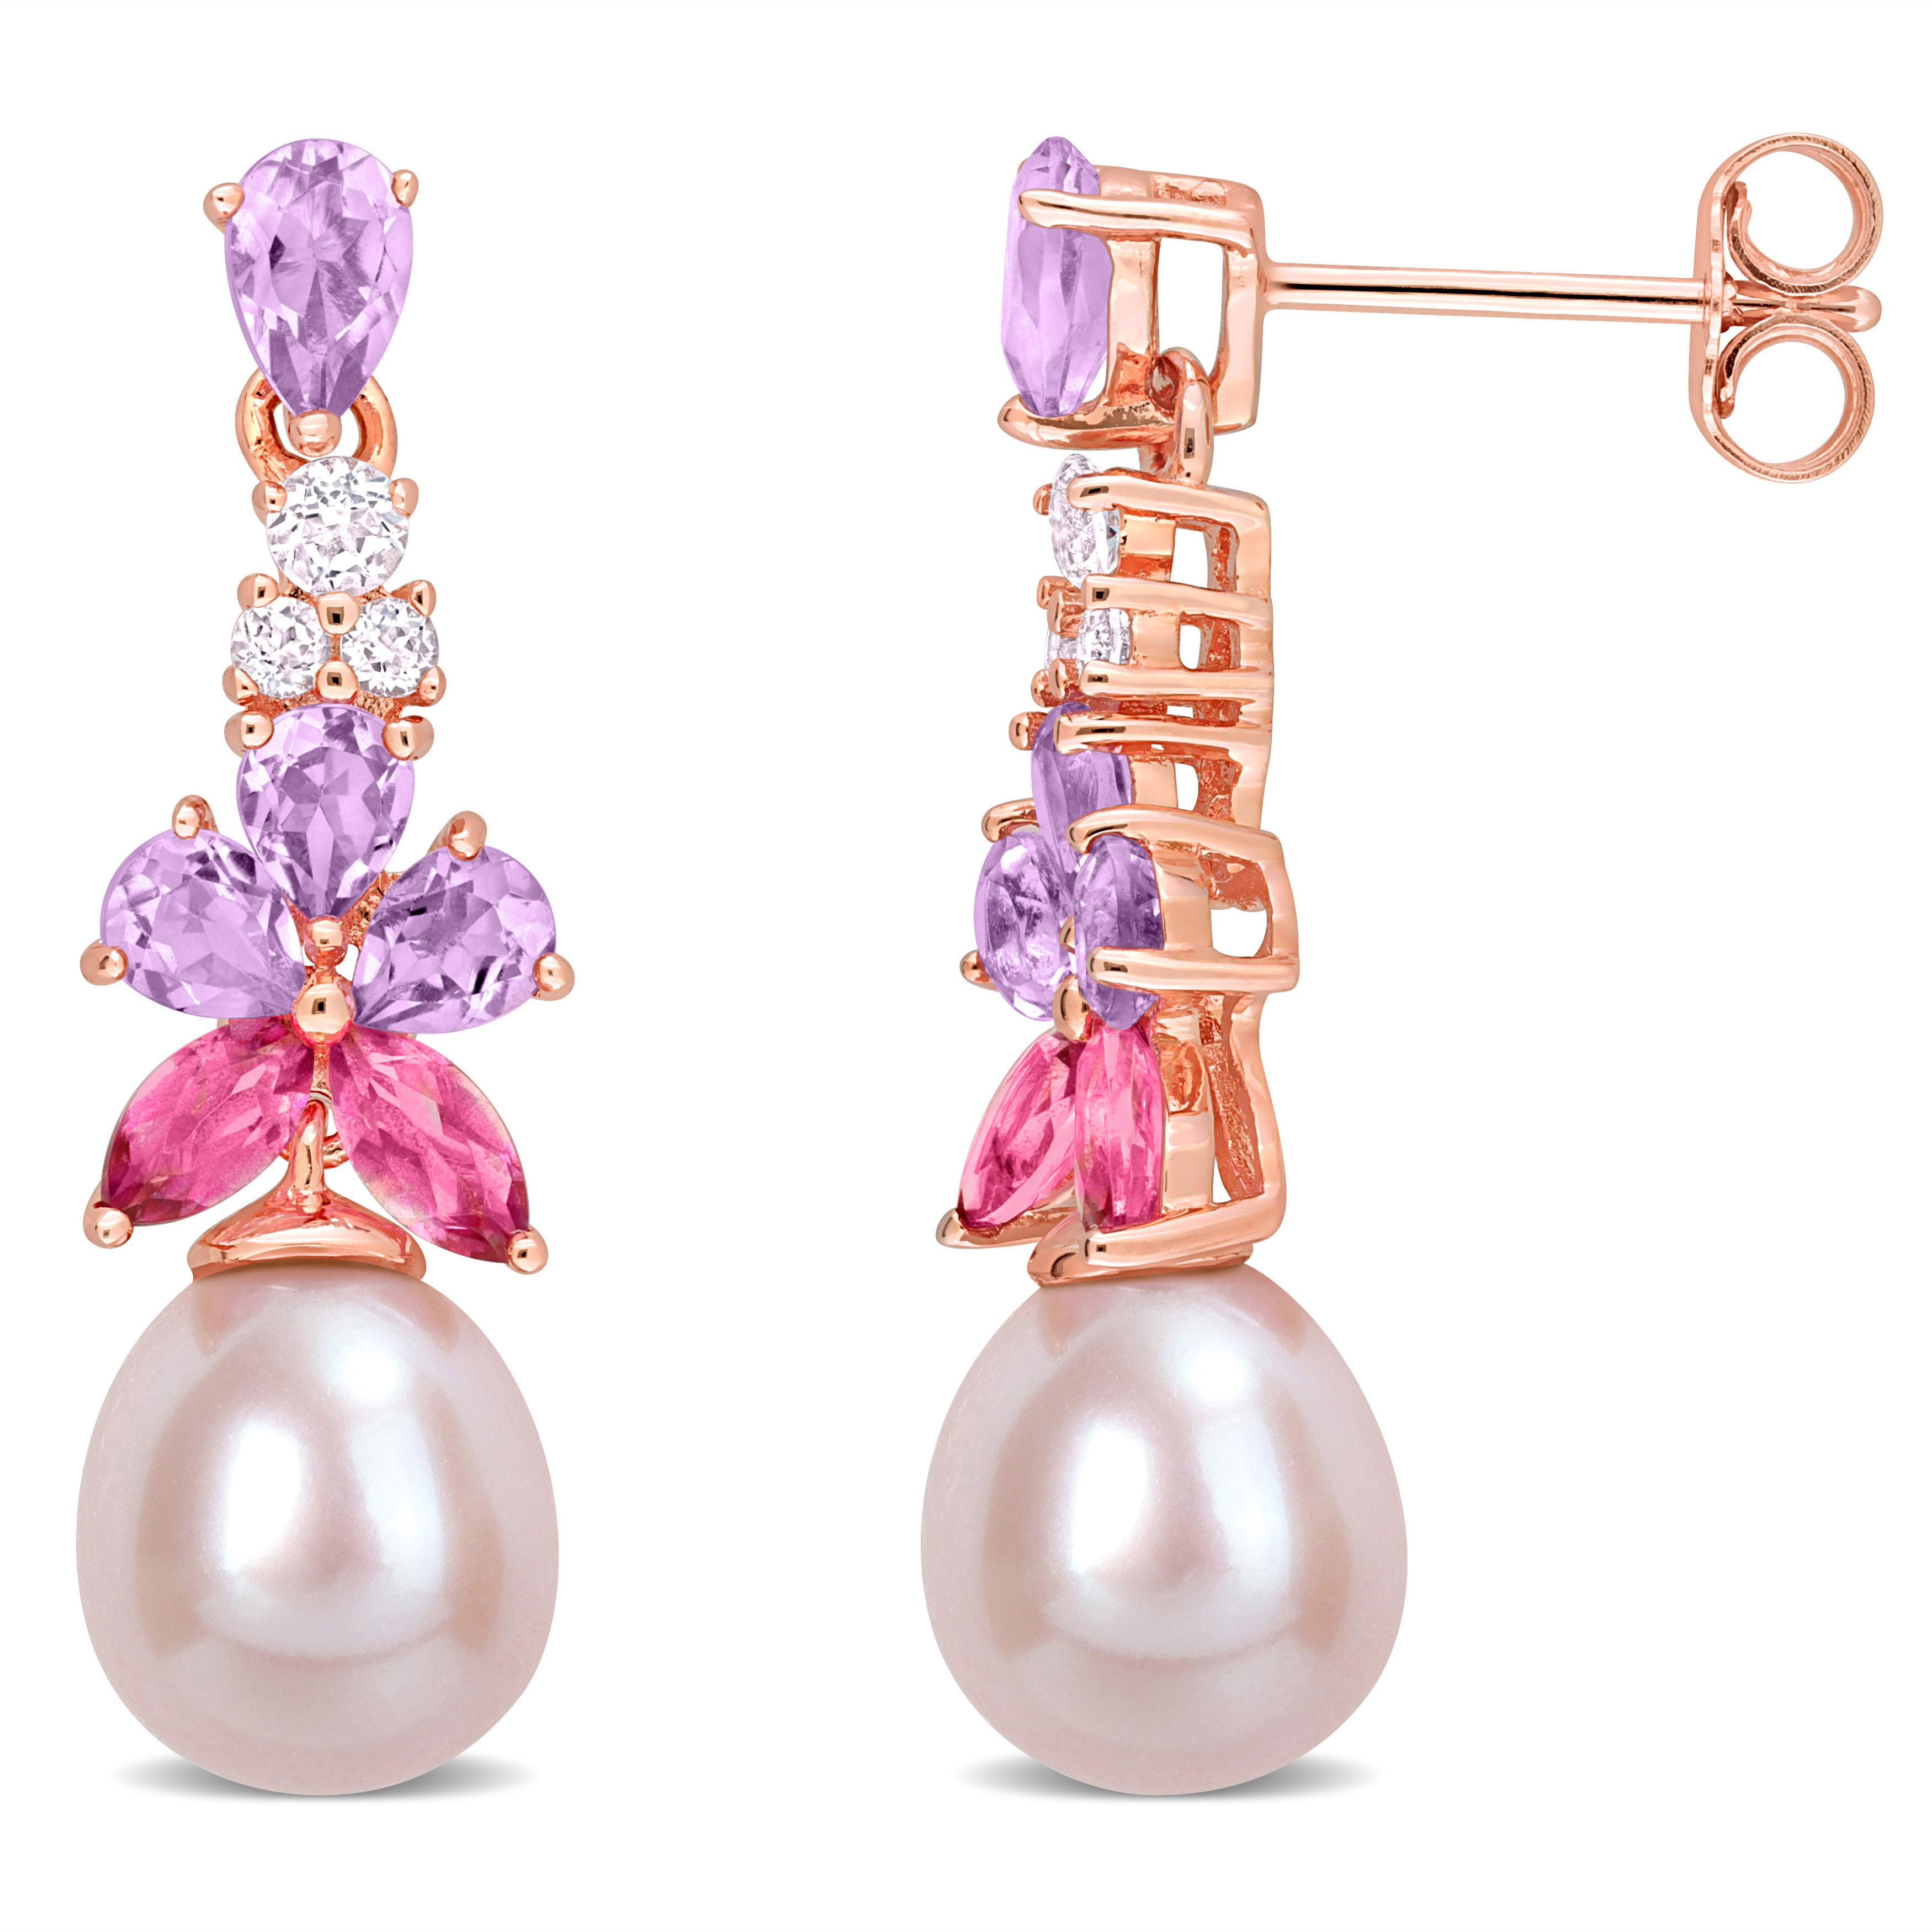 8.5 - 9 MM Pink Freshwater Cultured Pearl 2 3/8 CT TGW Rose de France and White and Pink Topaz Floral Drop Earrings in 18k Rose Gold Plated Sterling Silver